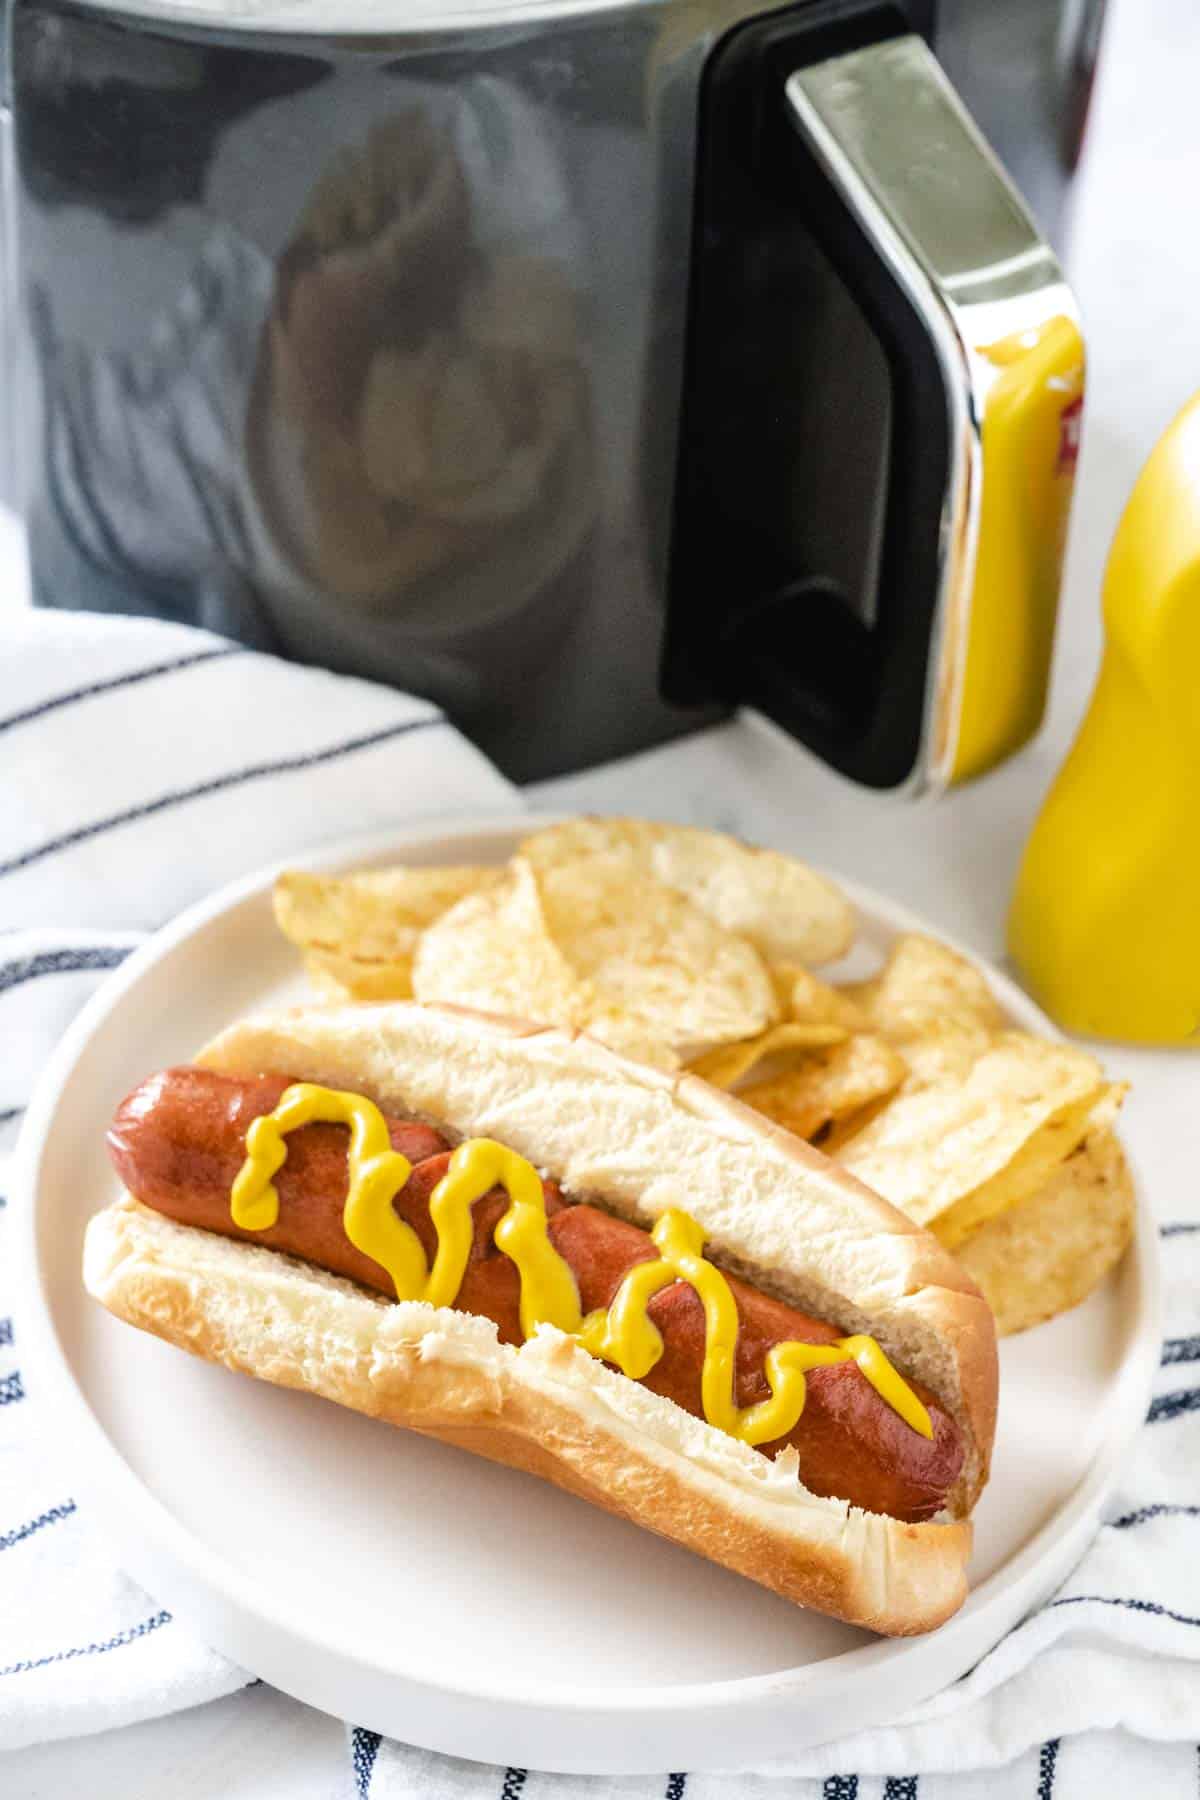 A hot dog cooked in the air fryer on a white plate along with potato chips with the air fryer in the background.